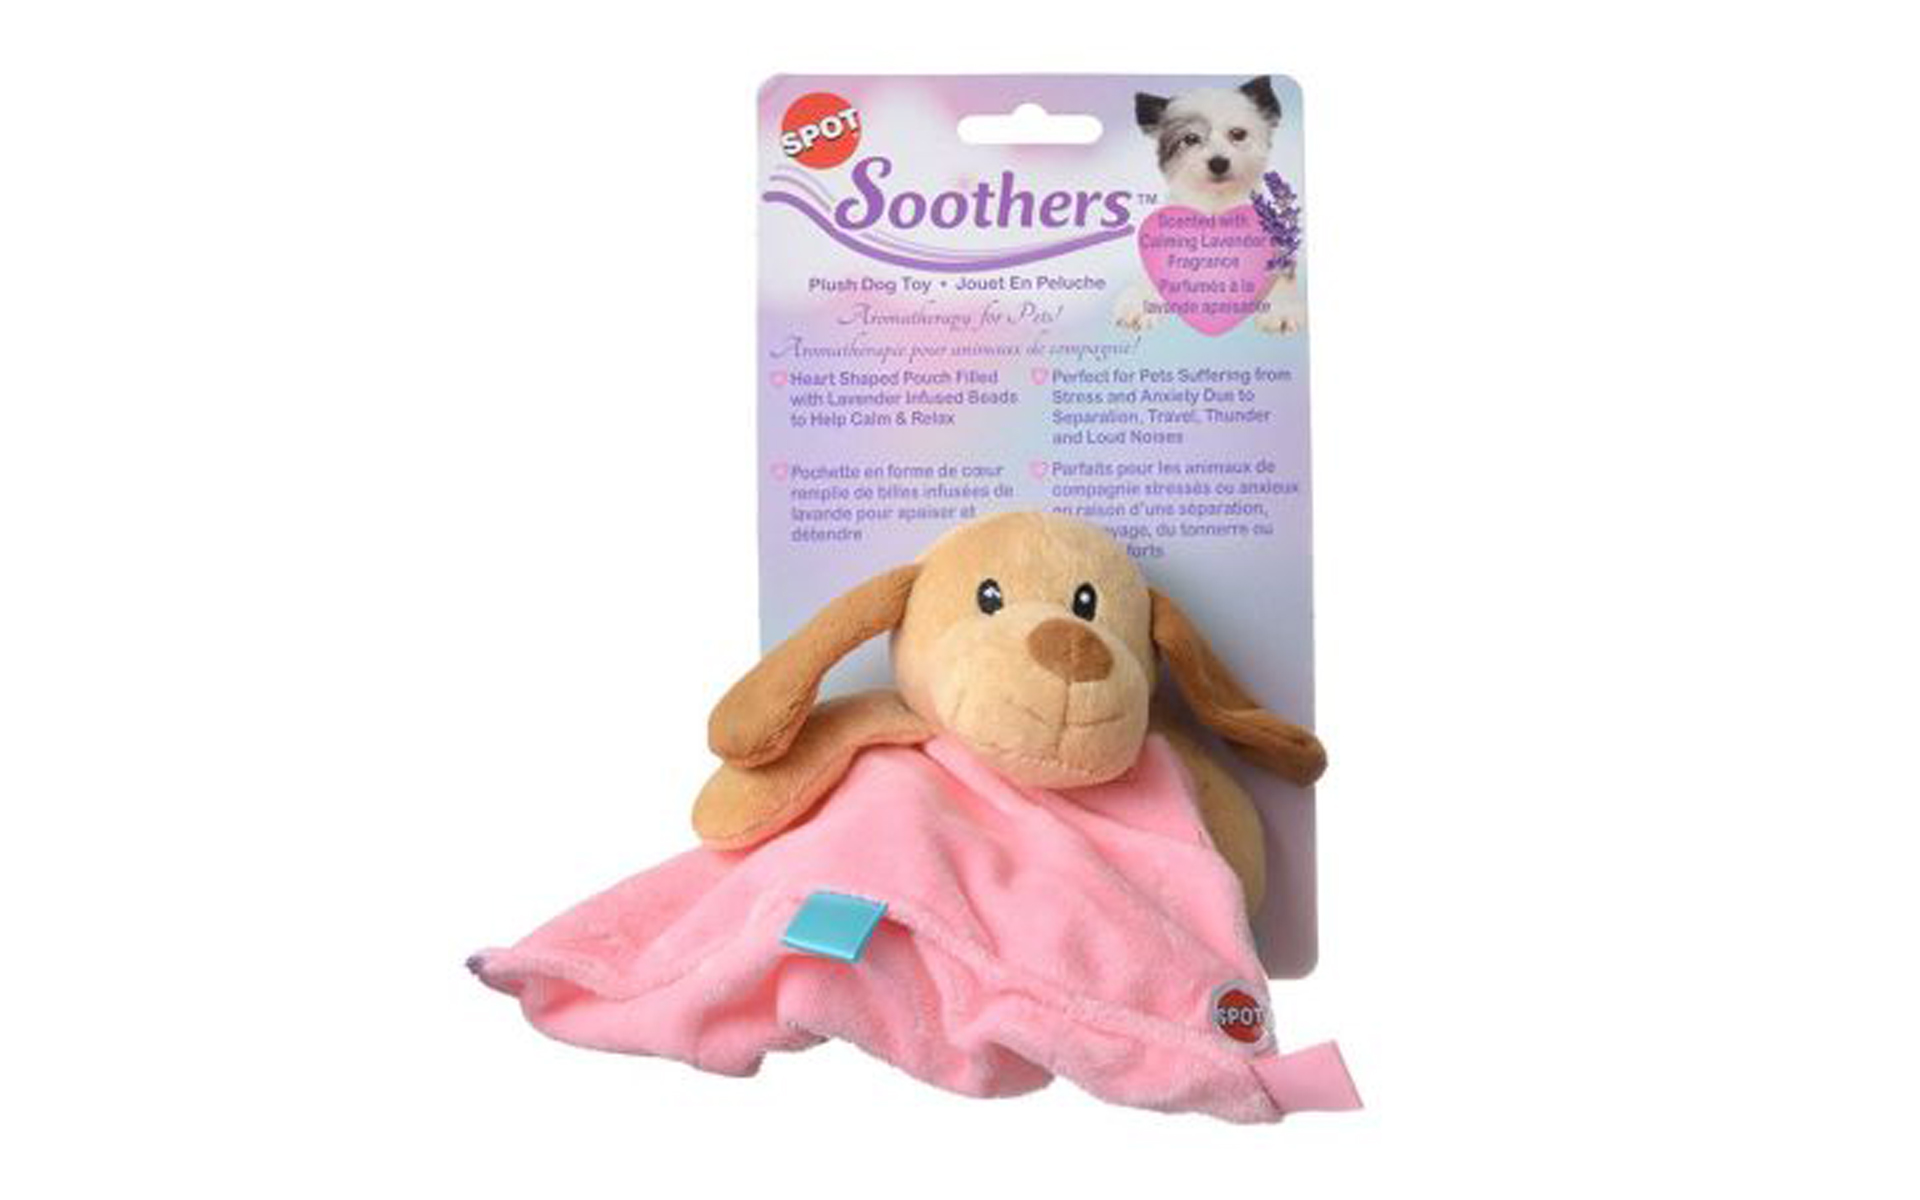 Soothers Blanket Dog Toy